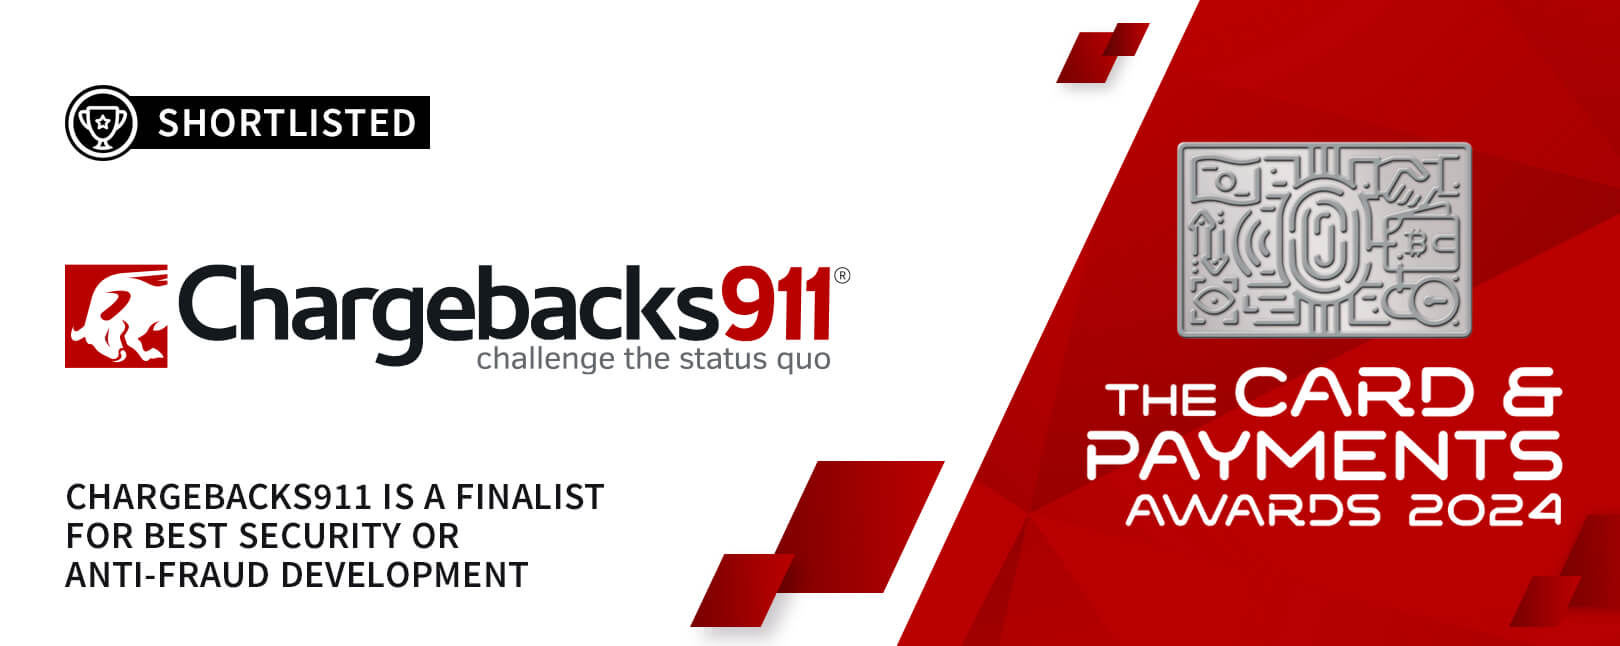 Chargebacks911®: The “Best Security or Anti-Fraud Development” for 2024!